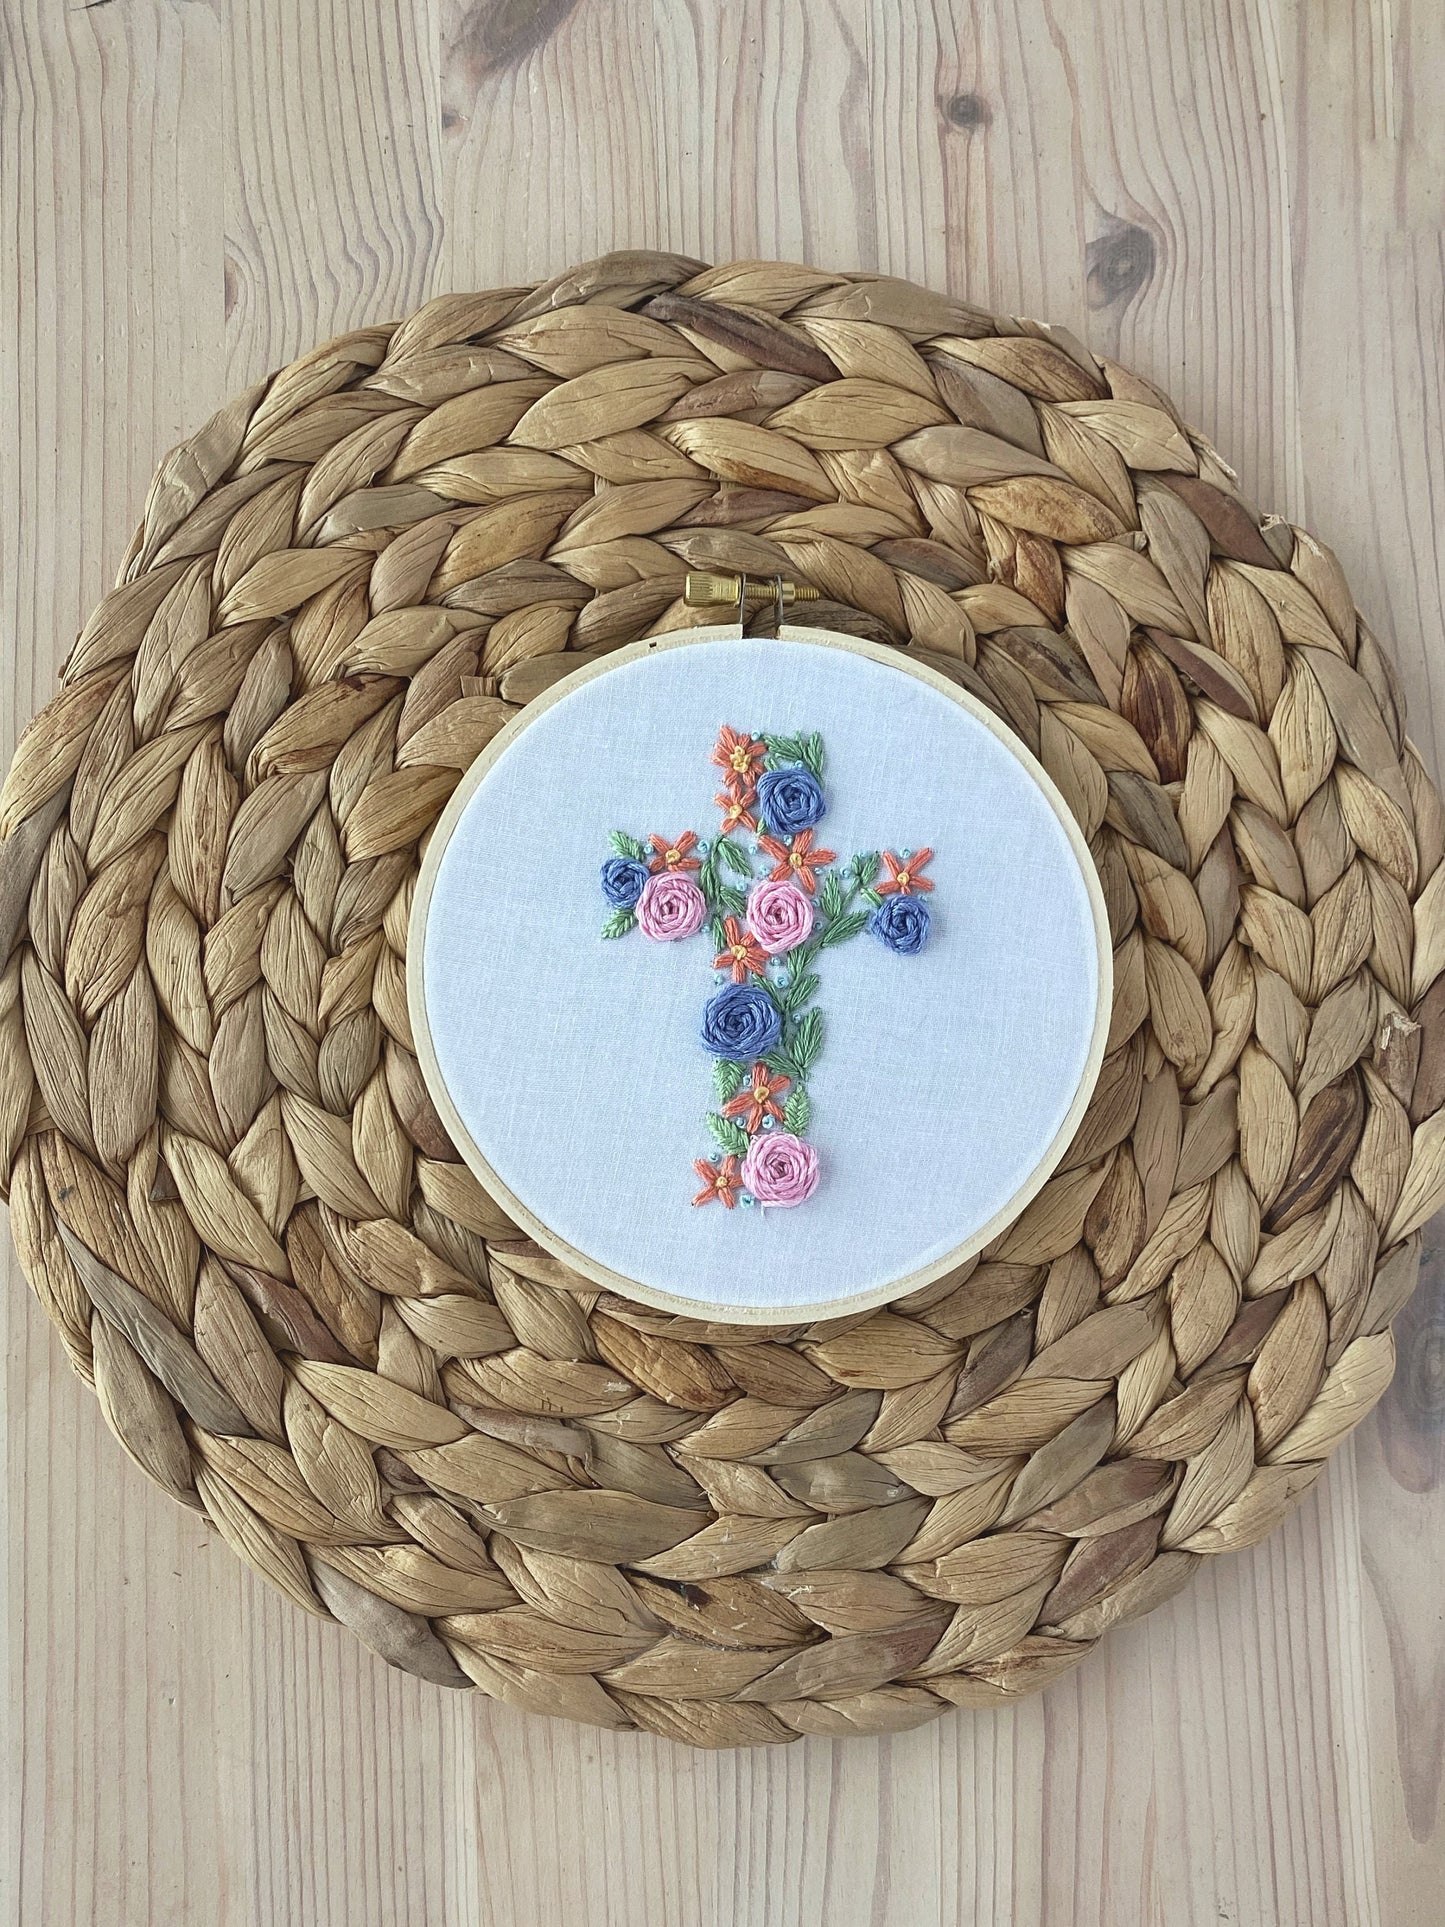 Embroidery Pattern || Floral Cross || Christian Hand Embroidery